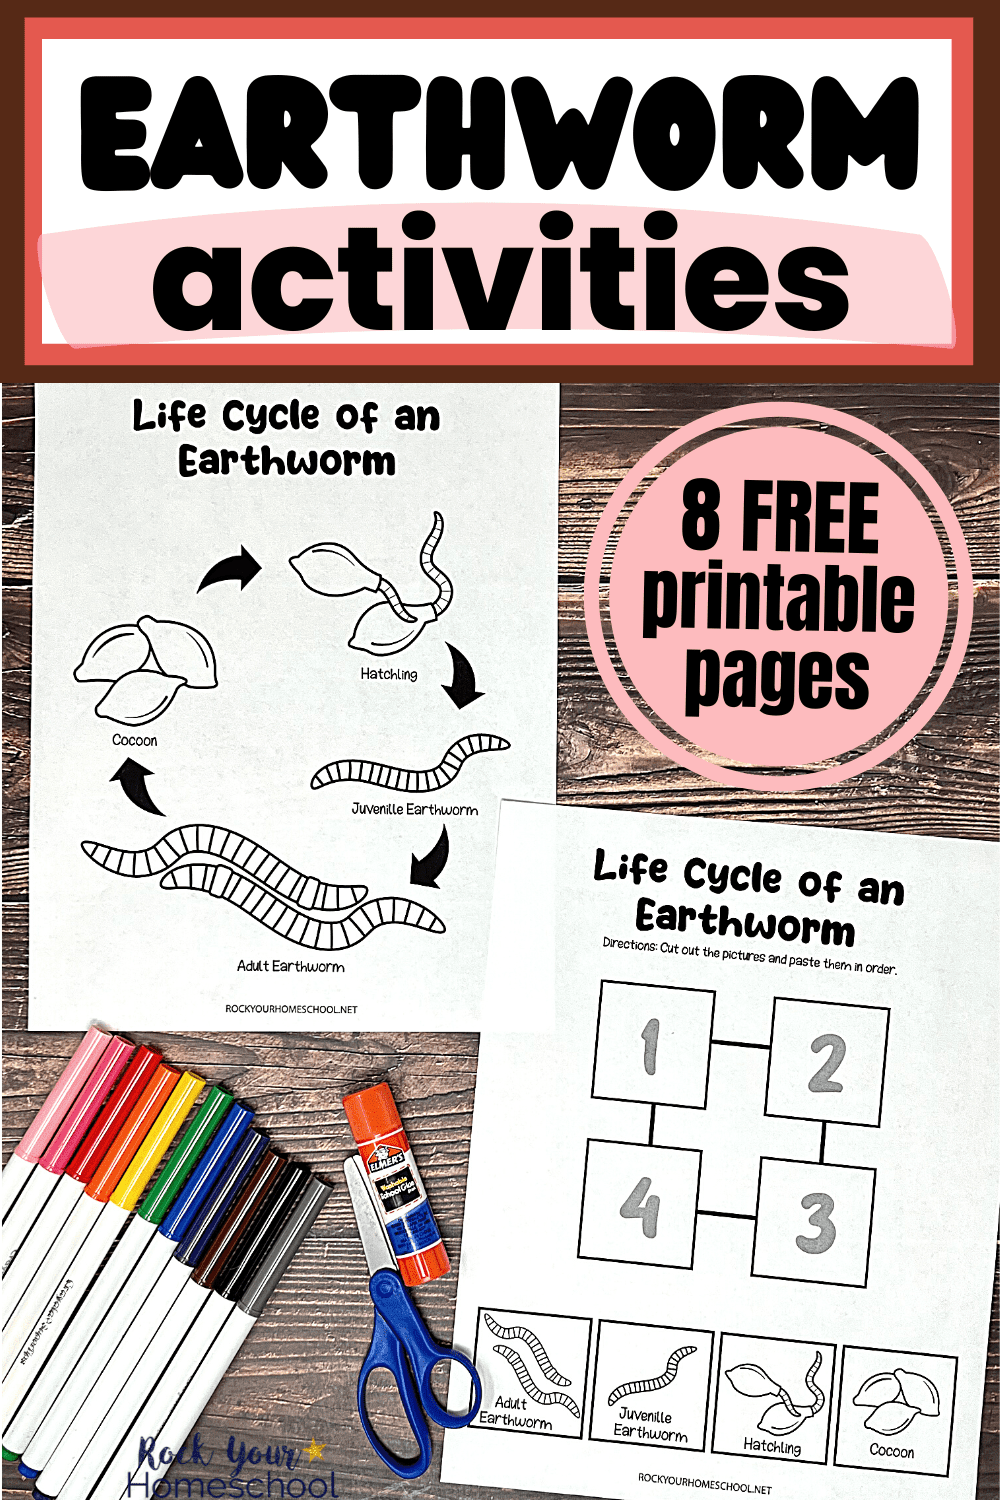 earthworm-activities-for-science-fun-ideas-and-8-free-printables